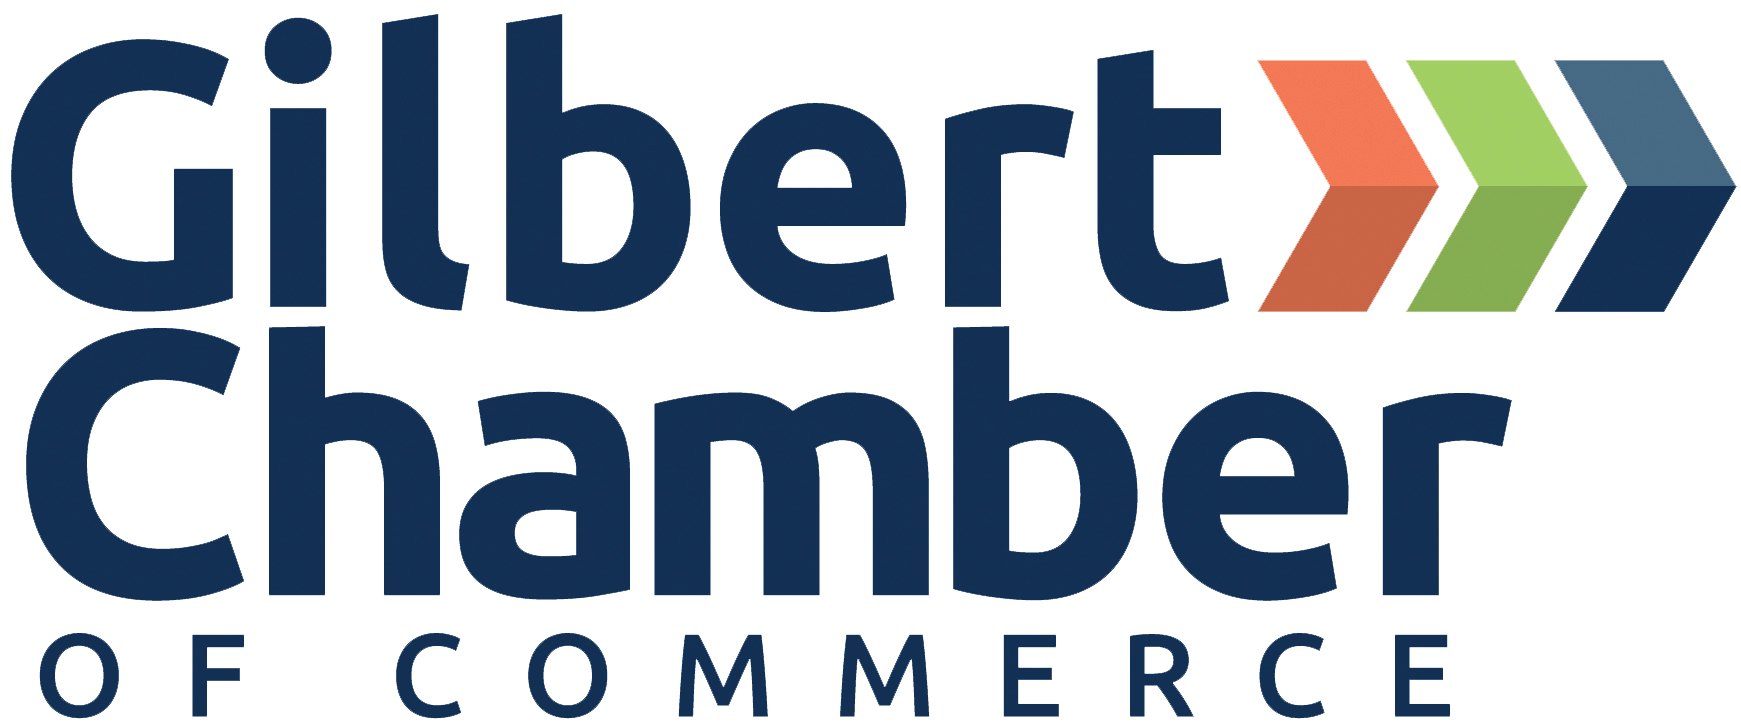 For quality Heater repair in Mesa AZ, choose a Gilbert chamber of commerce member.